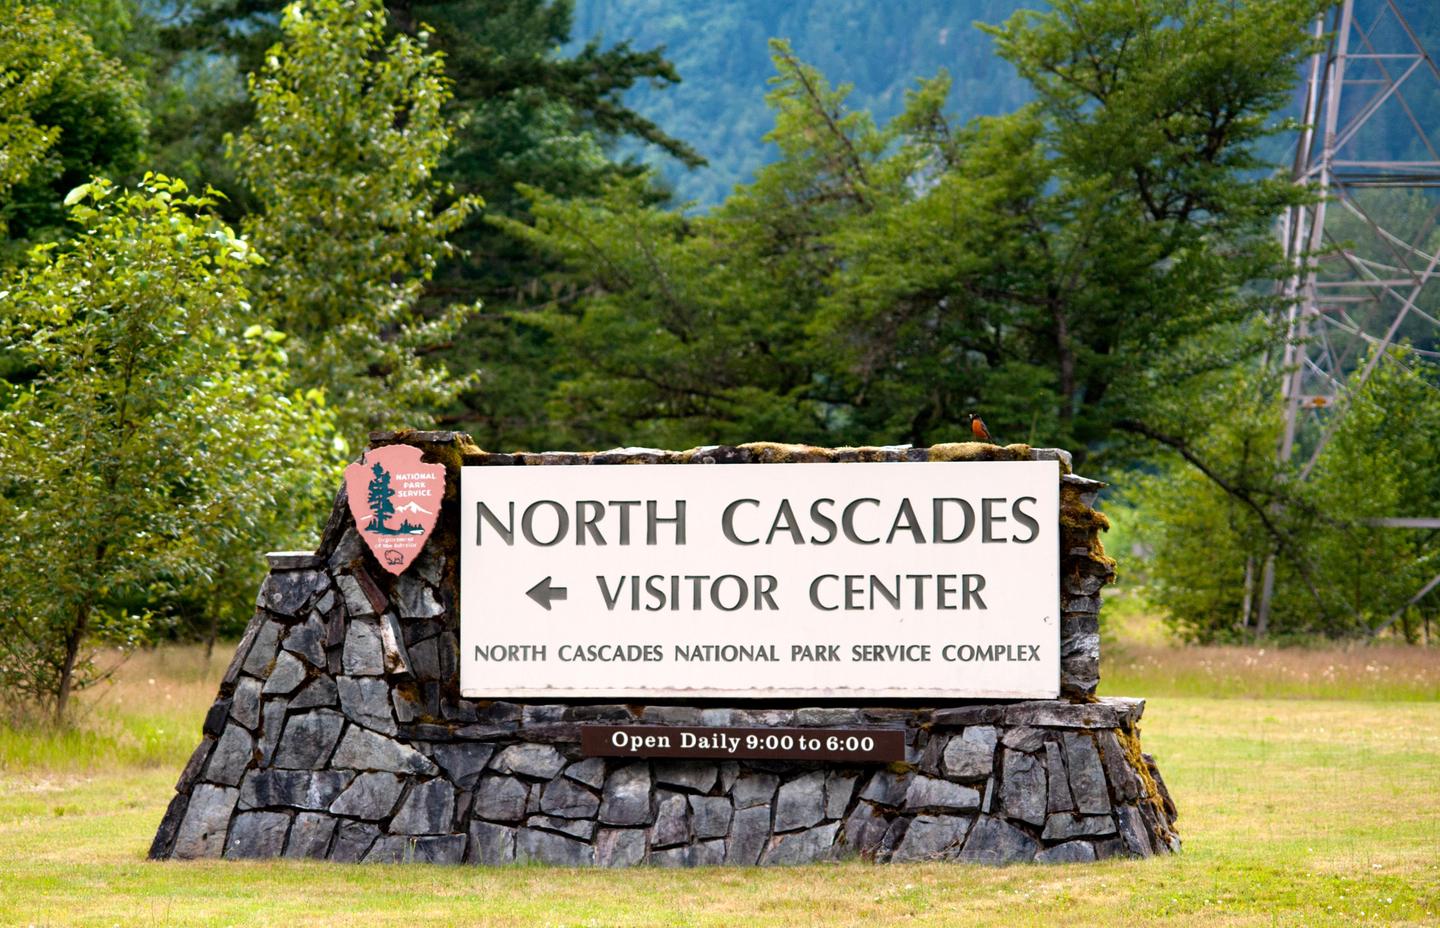 Preview photo of North Cascades Visitor Center